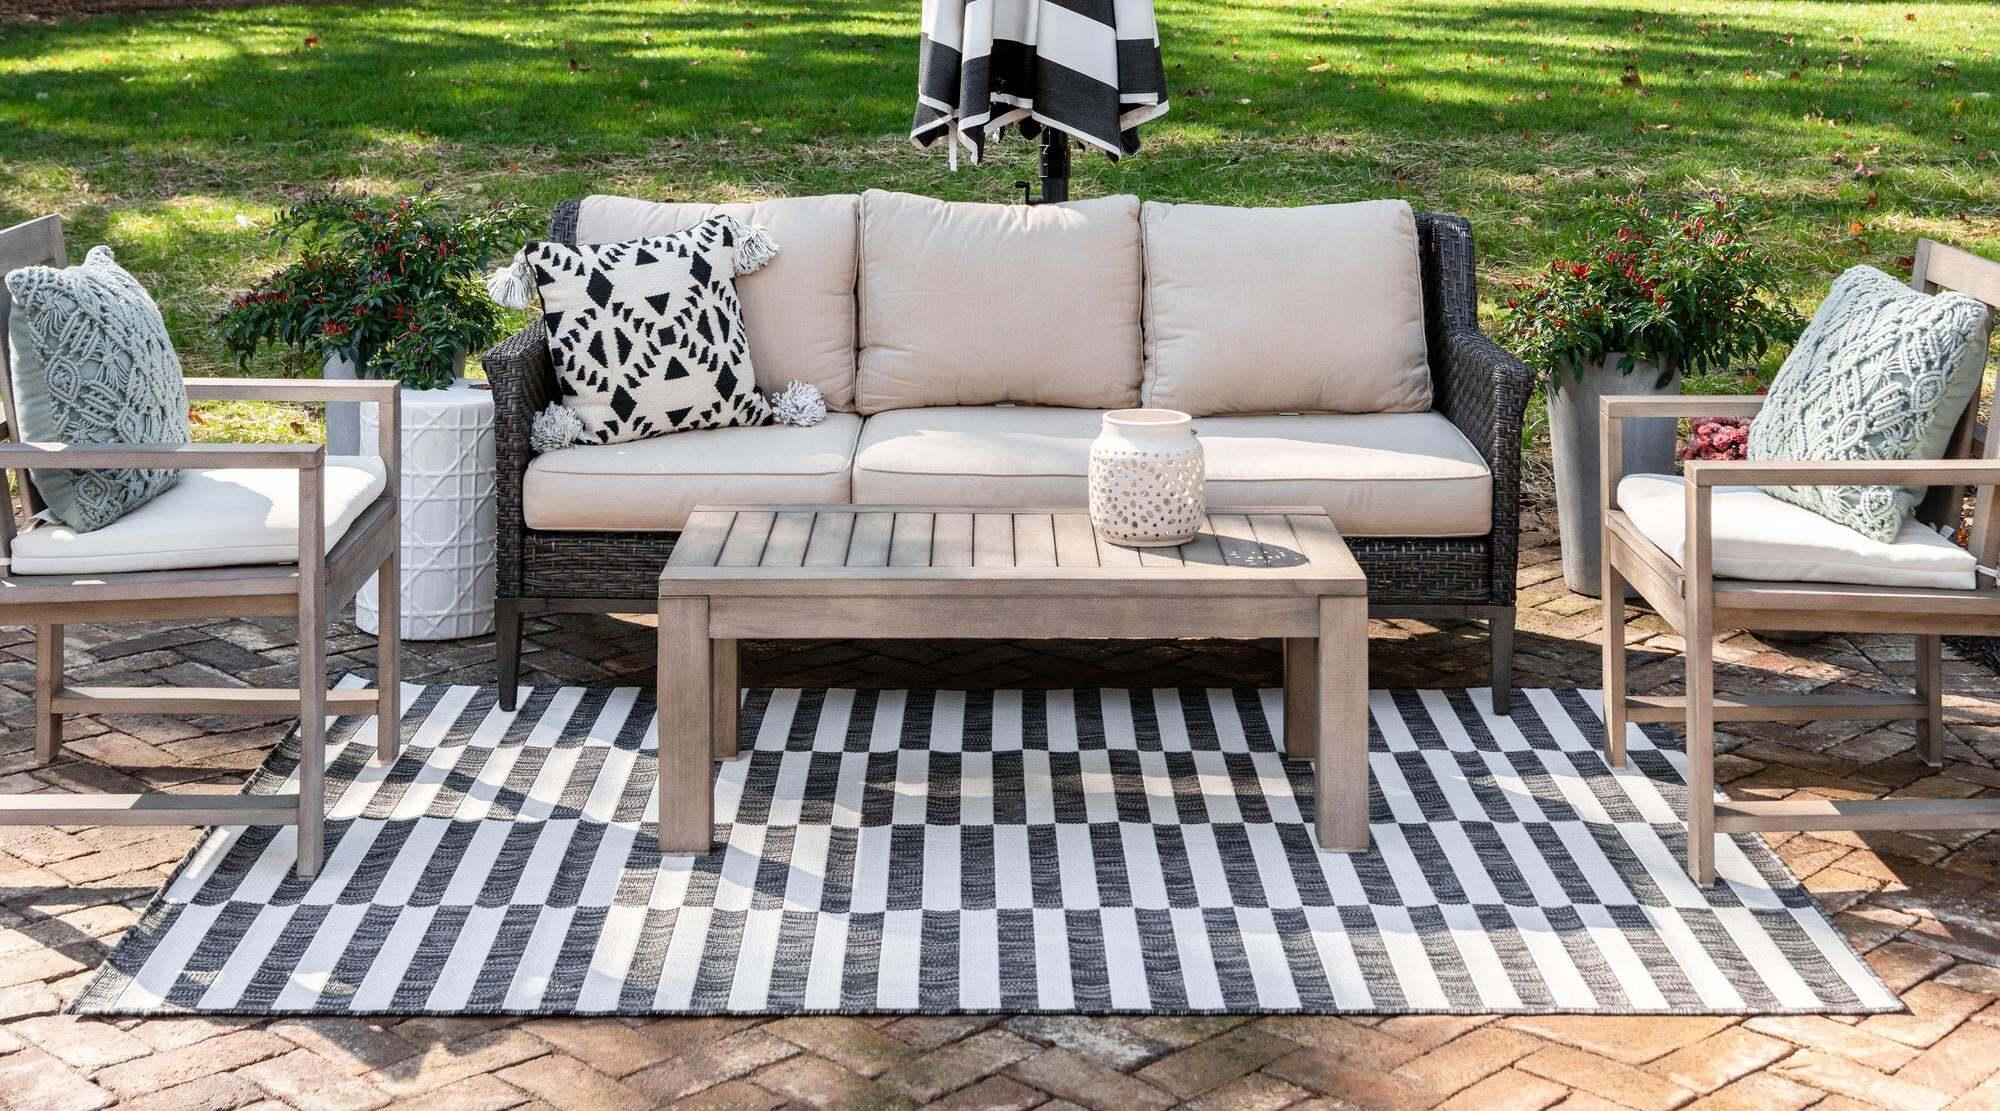 Unique Loom Outdoor Rugs - Outdoor Striped Geometric Rectangular 8x11 Rug Charcoal & Ivory